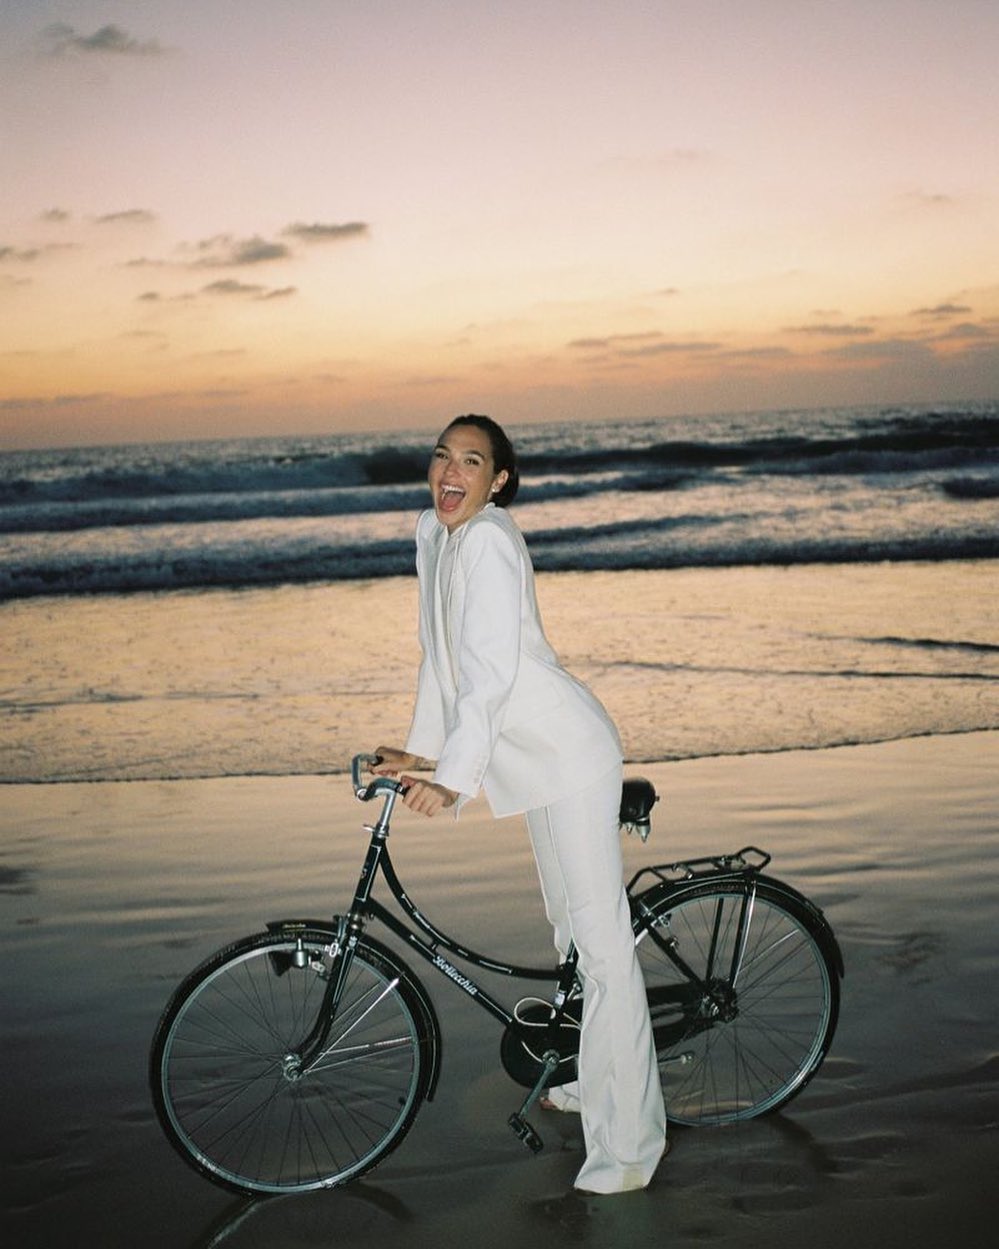 Three of my favs - the beach, sunsets and riding bikes in a suit ????